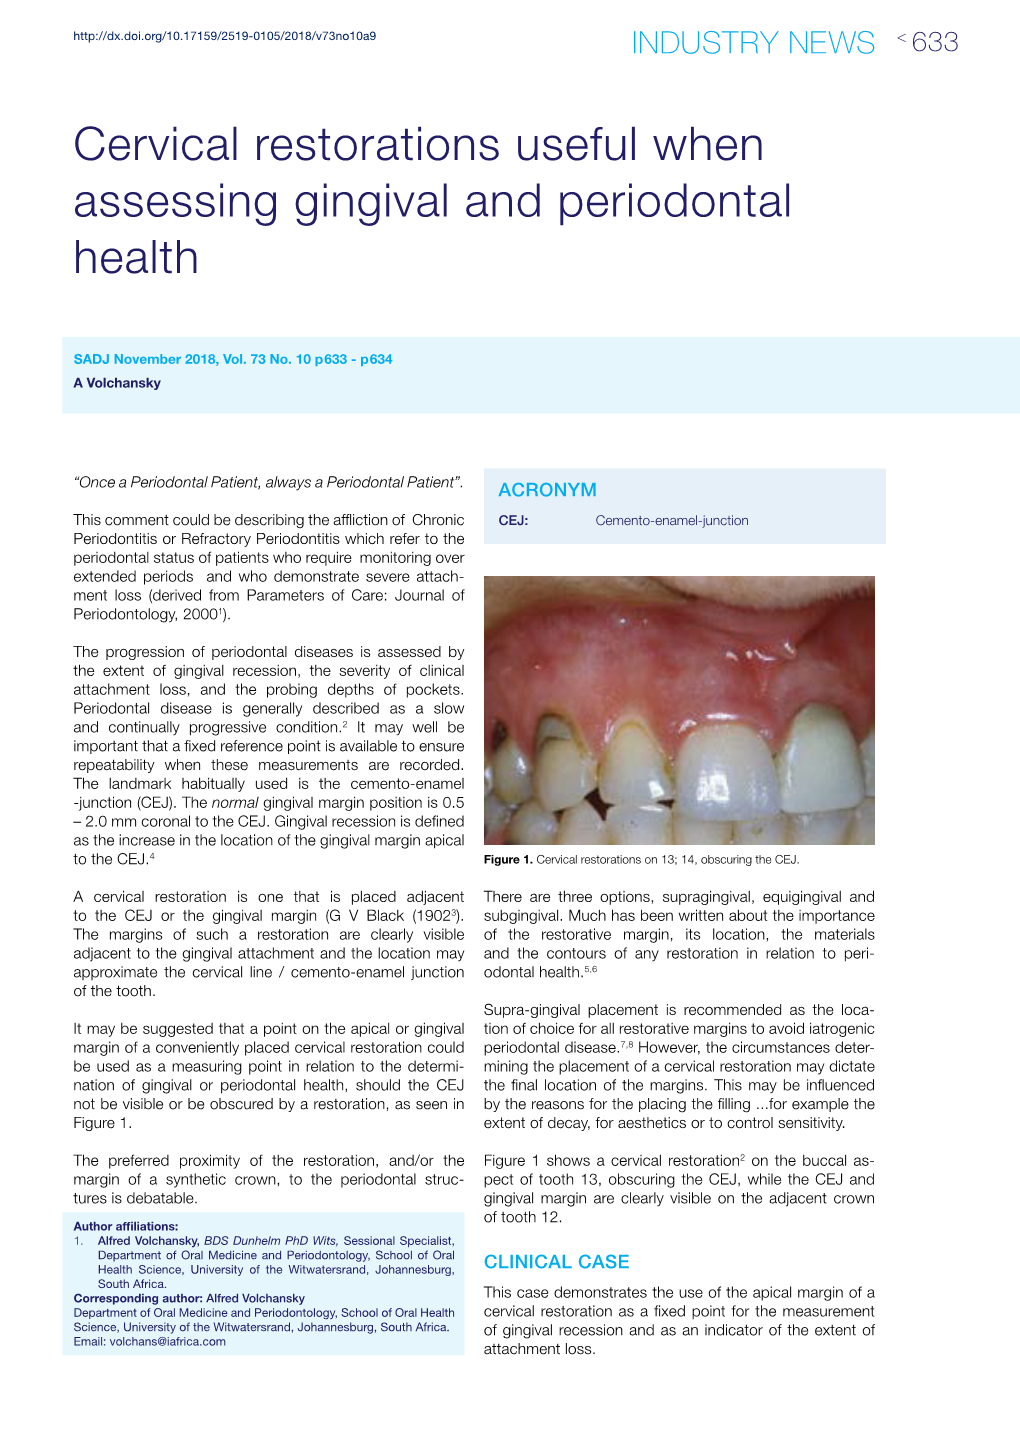 Cervical Restorations Useful When Assessing Gingival and Periodontal Health